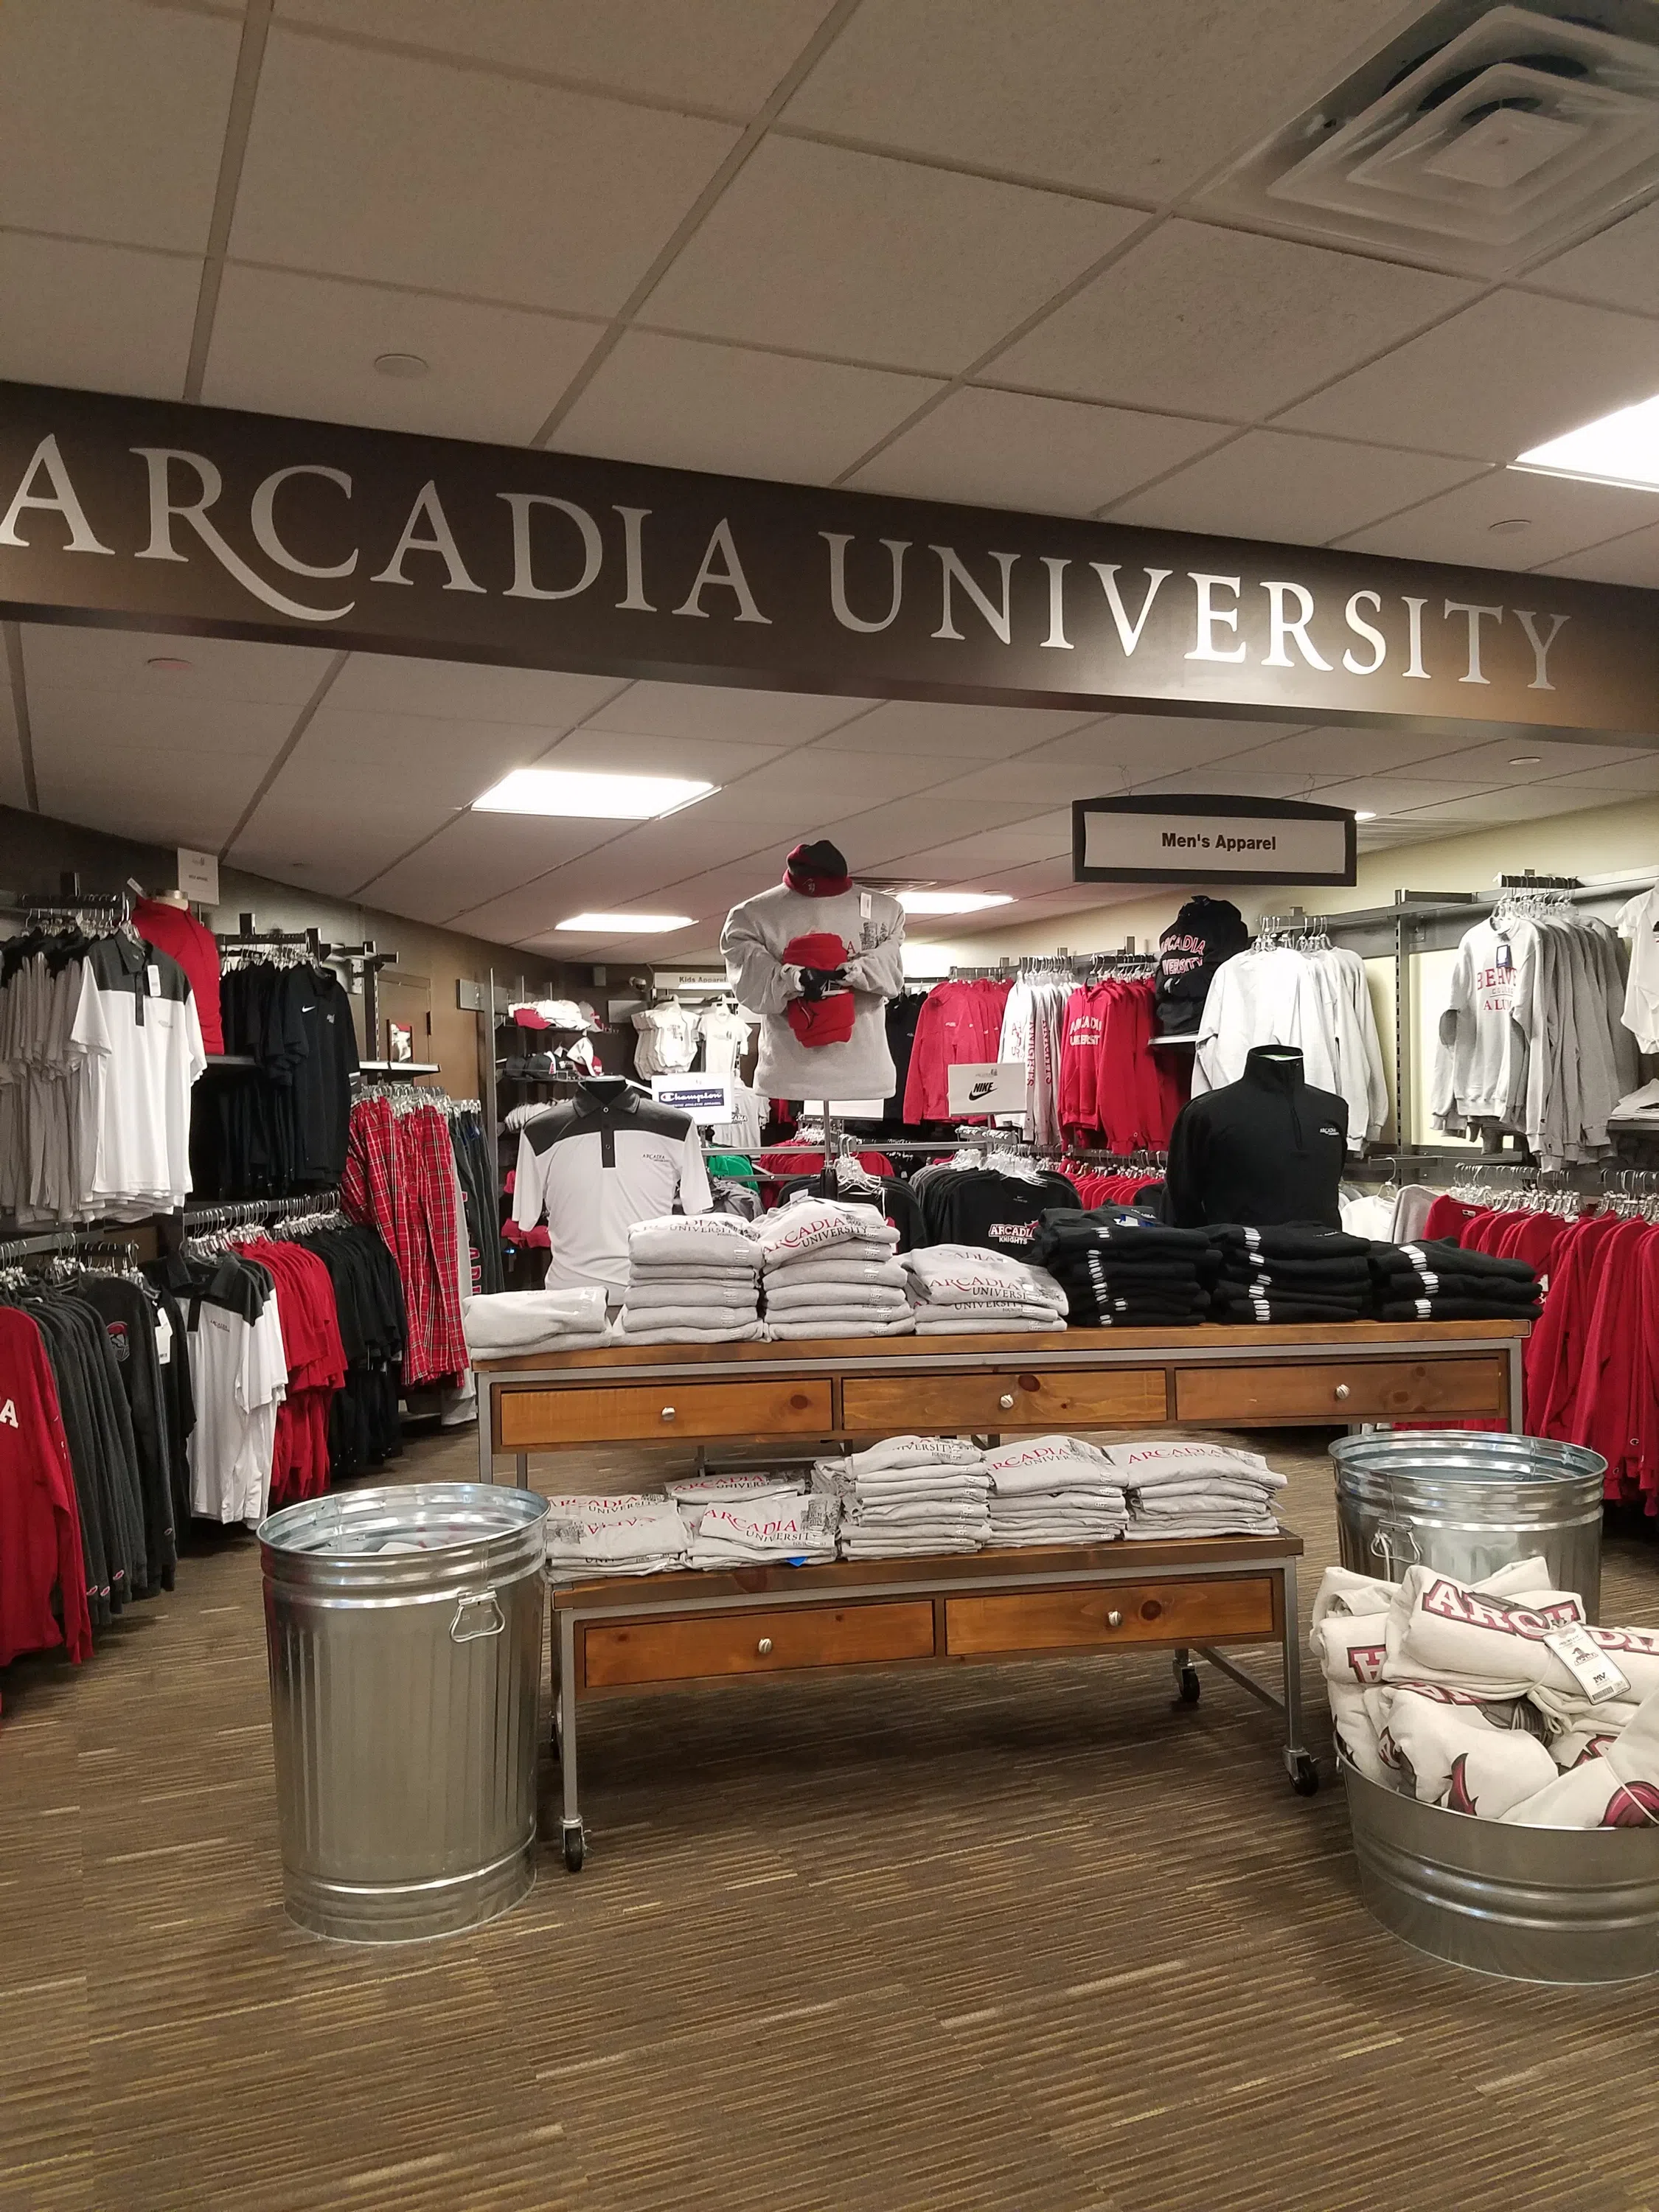 Arcadia's bookstore sells lots of great gear